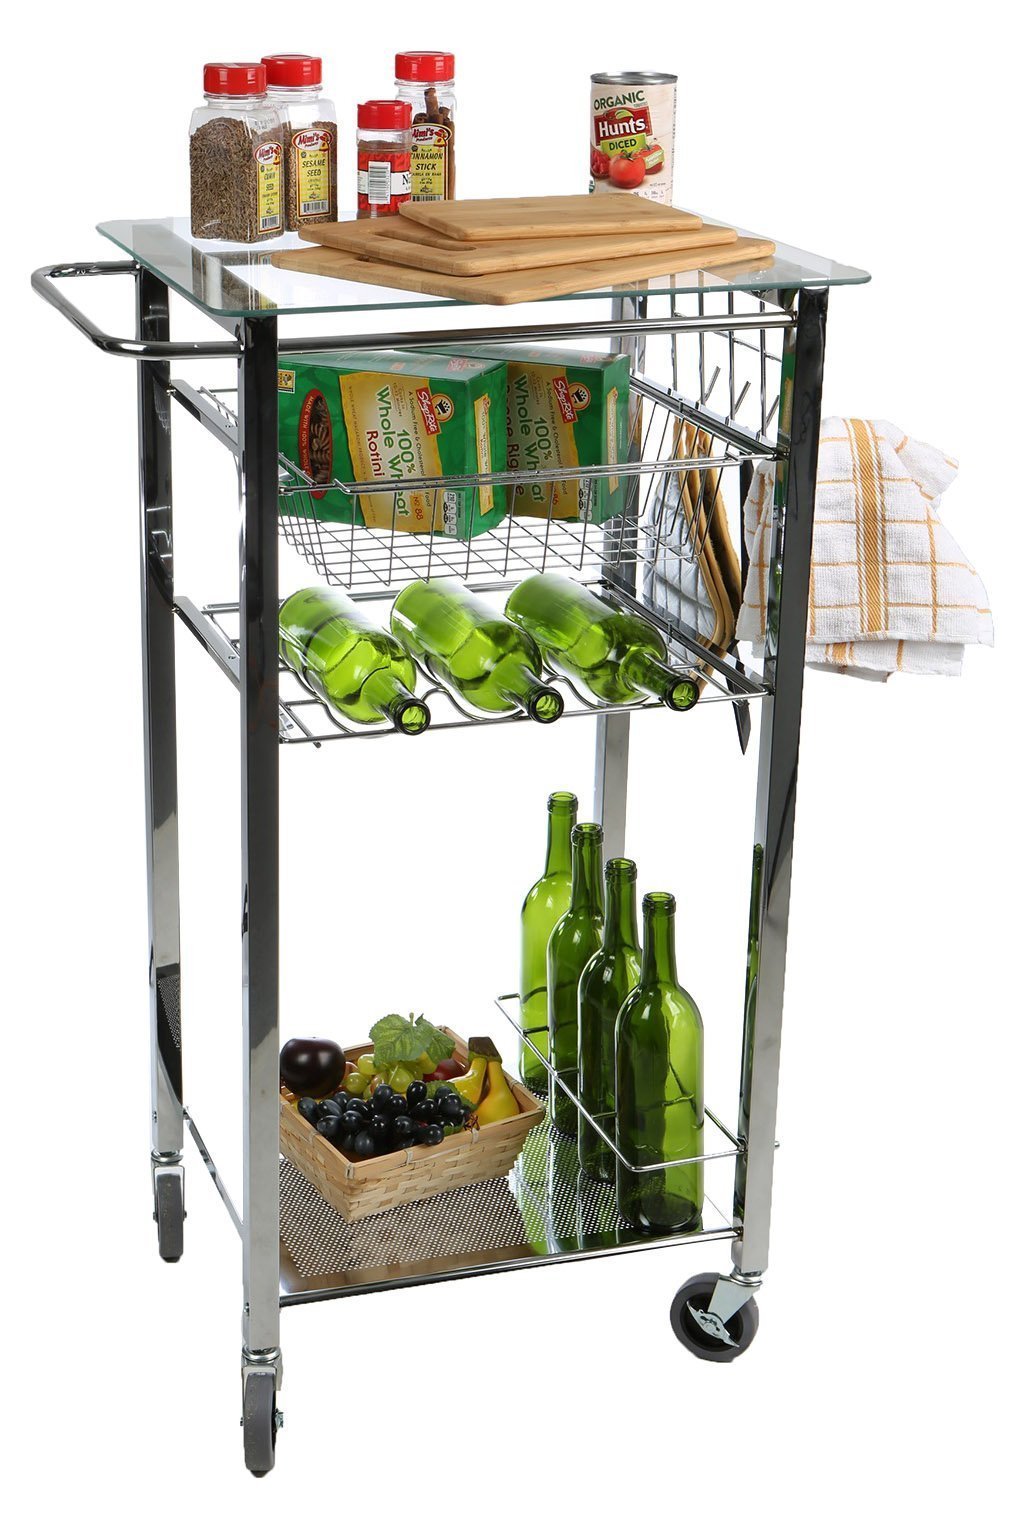 Mind Reader Glass Top Mobile Kitchen Cart with Wine Bottle Holder, Wine Rack, Towel Holder, Perfect Kitchen Island for Cooking Utensils, Kitchen Appliances, and Food Storage, Silver